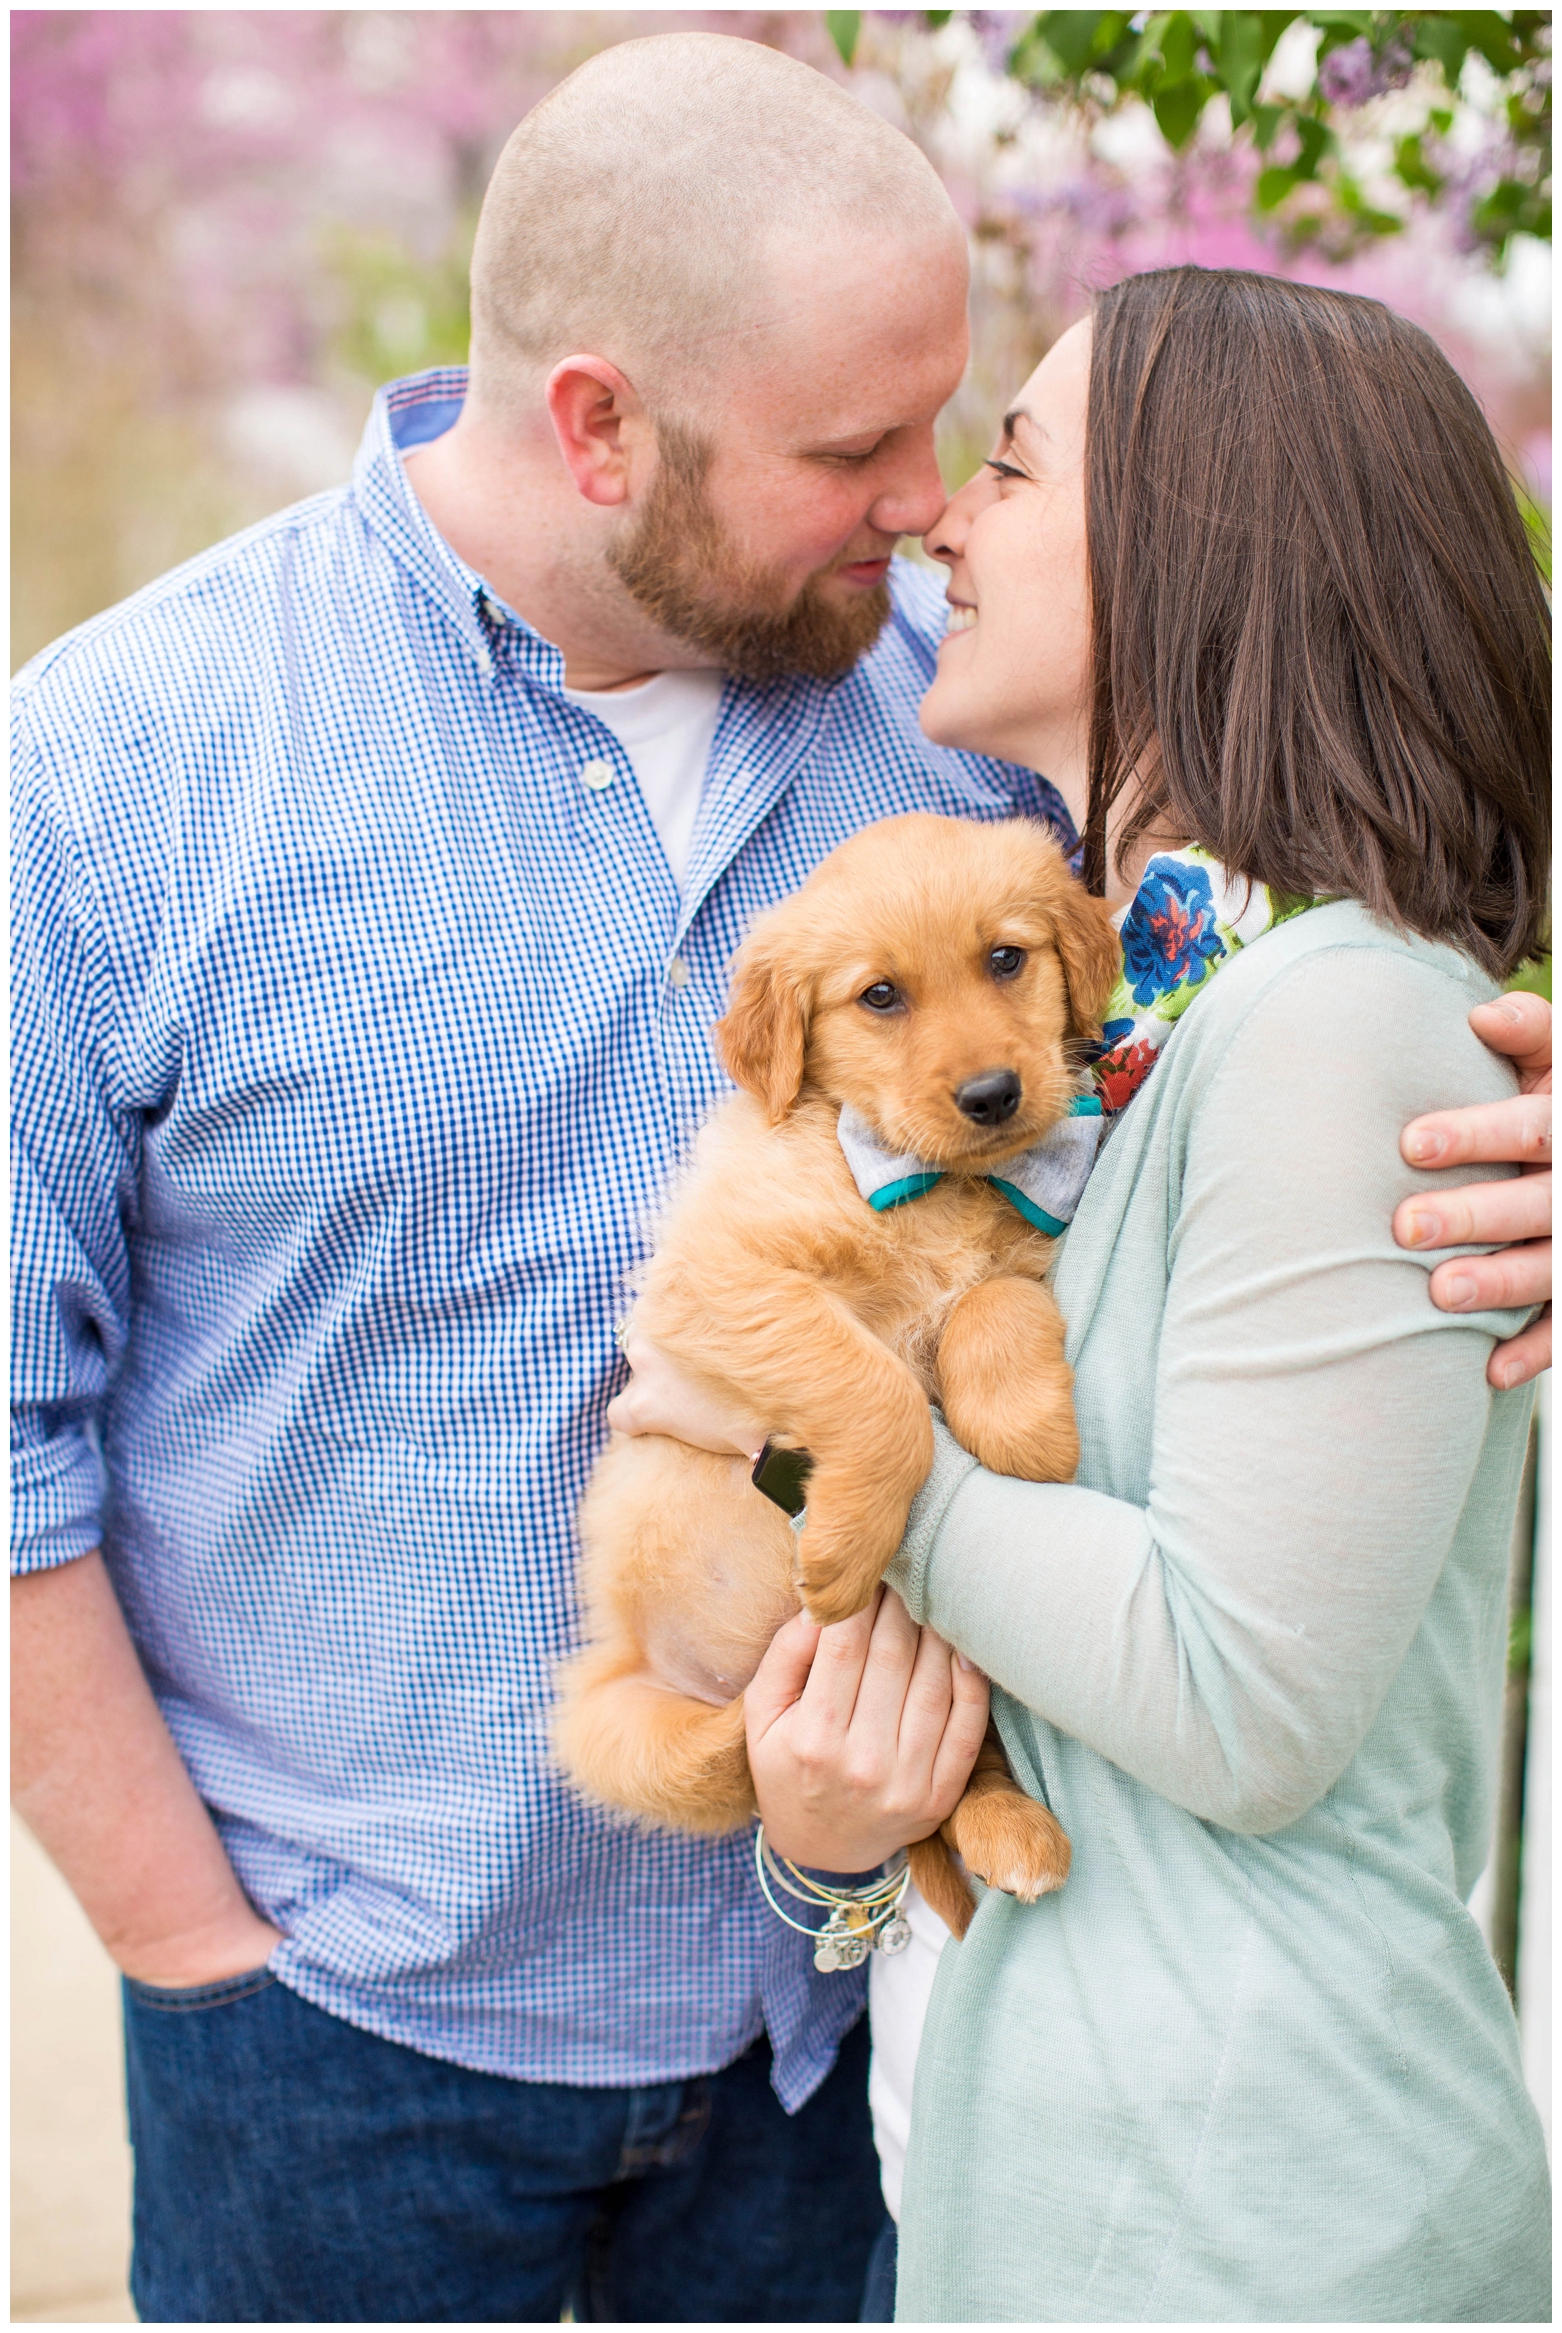 View More: http://hopetaylorphotographyphotos.pass.us/kelsie-and-byron-anniversary